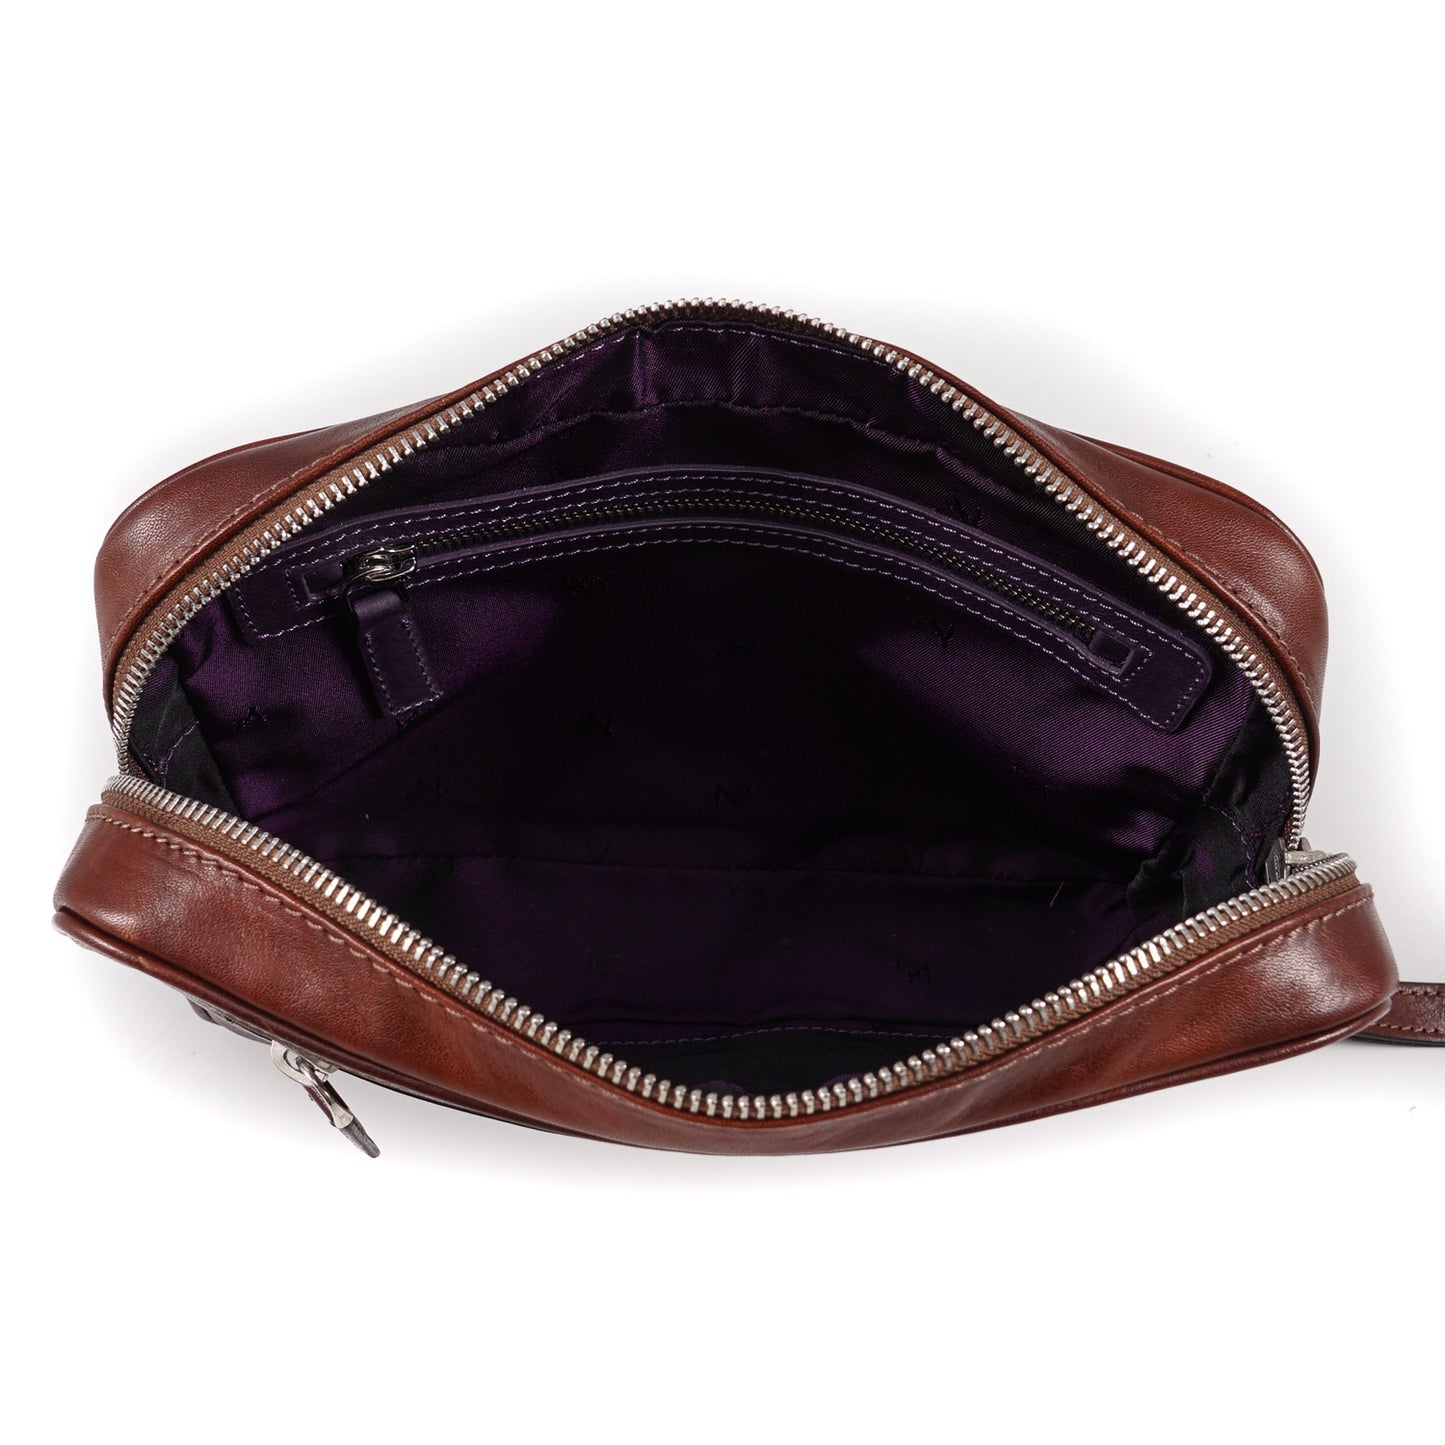 Isaia Antiqued Leather Toiletry Bag - Top Shelf Apparel